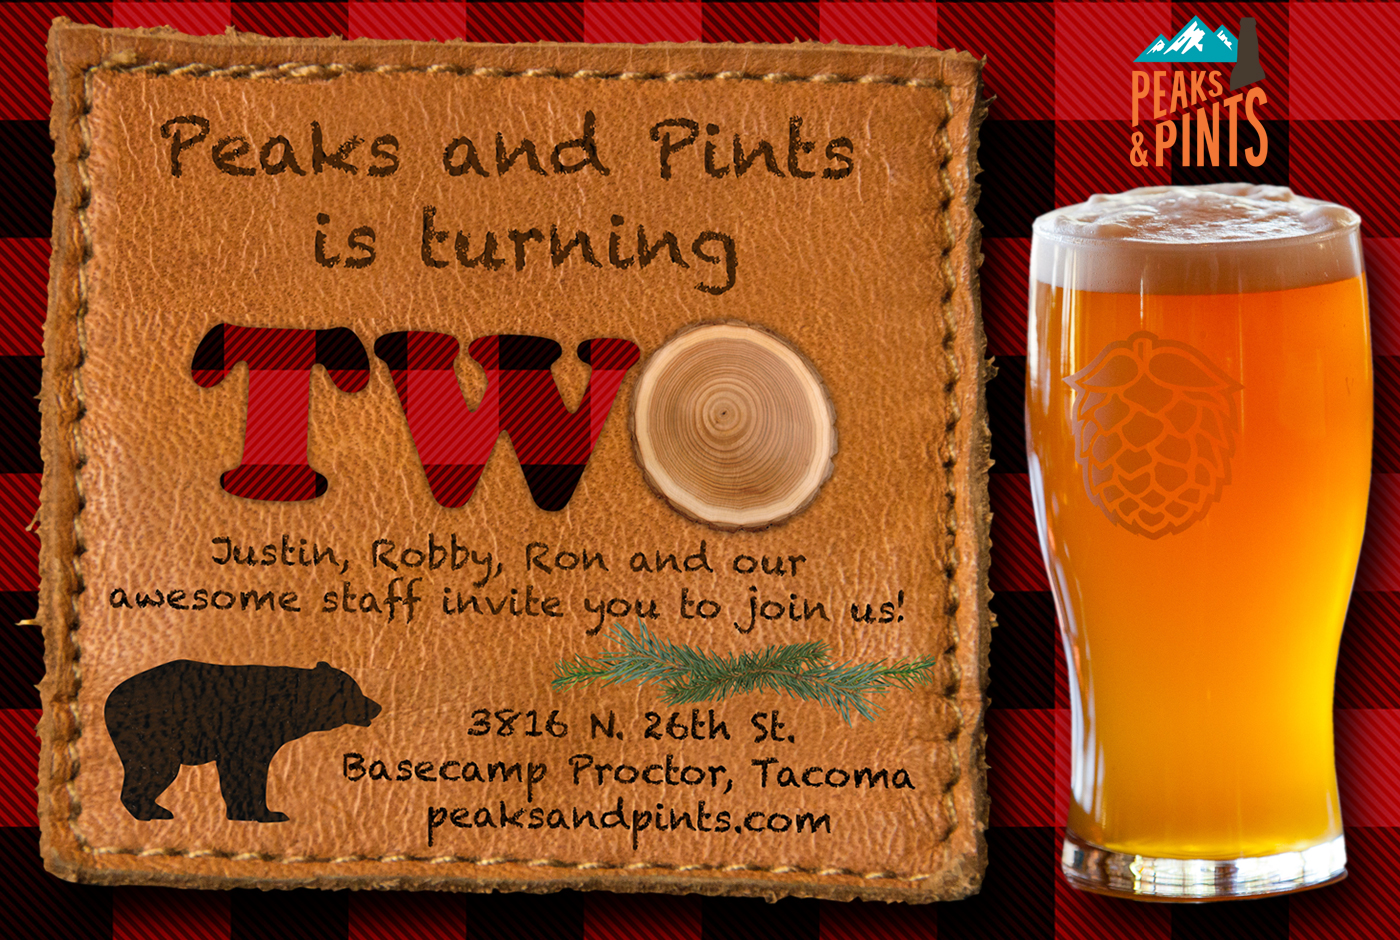 Peaks-and-Pints-Second-Anniversary-Party-calendar